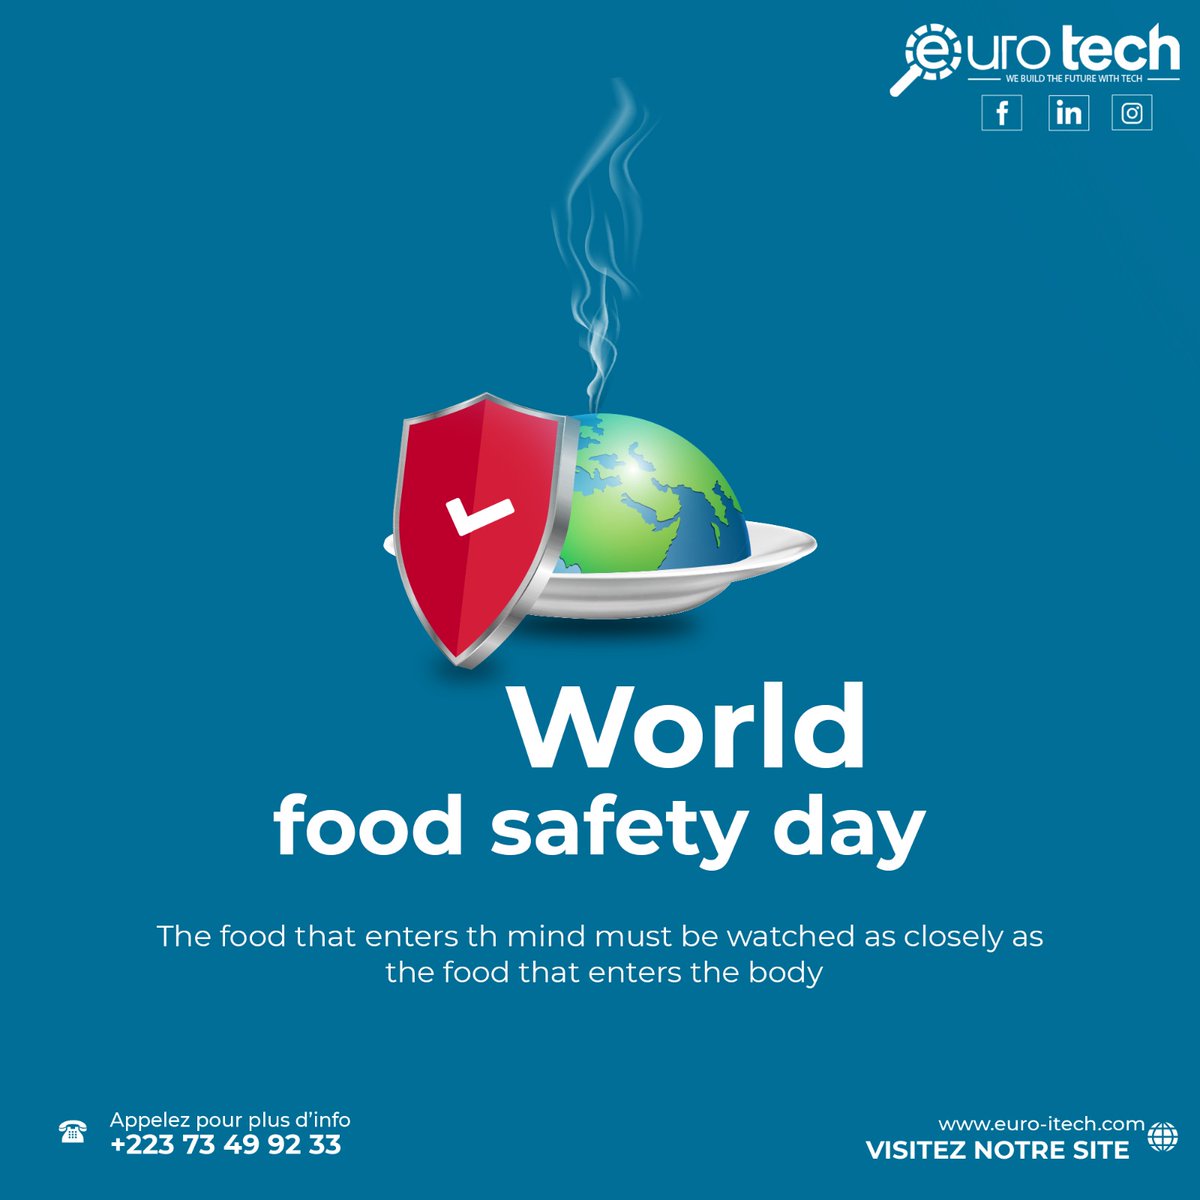 From Farm to Fork, Let's Ensure Safe and Nutritious Food for All. Happy World Food Safety Day!
.
#WorldFoodSafetyDay2023  #FoodSafetyDay  #SafeFoodForAll  #foodhygiene #technology #tech   #bamako #USA #uk #india #Africa #weeurotech #experienceeurotech